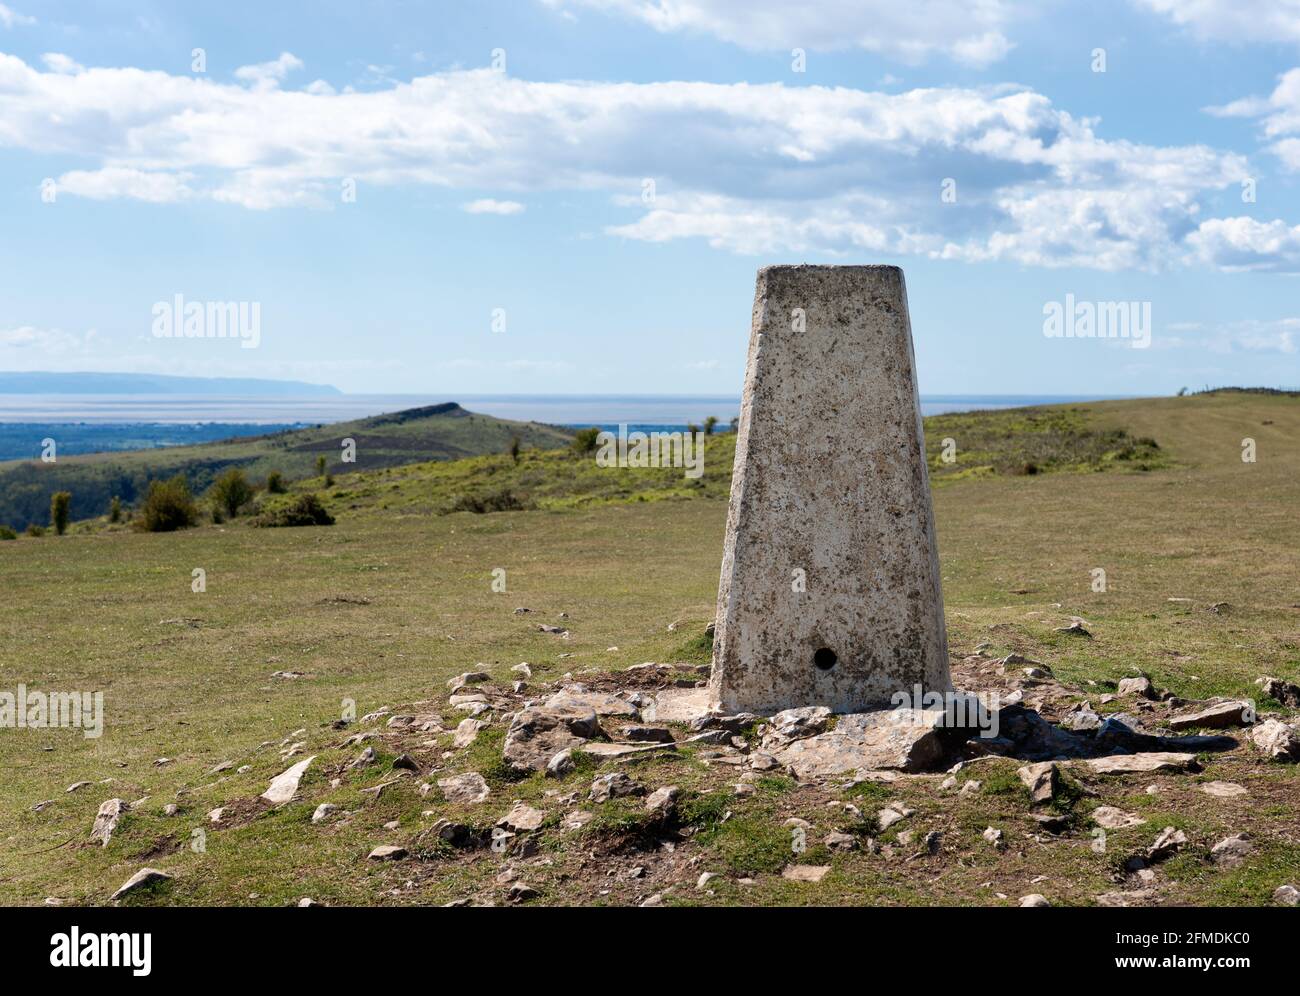 Trig point on Wavering Down in the Mendip HIlls of Somerset UK looking towards Crook peak and the Bristol Channel Stock Photo